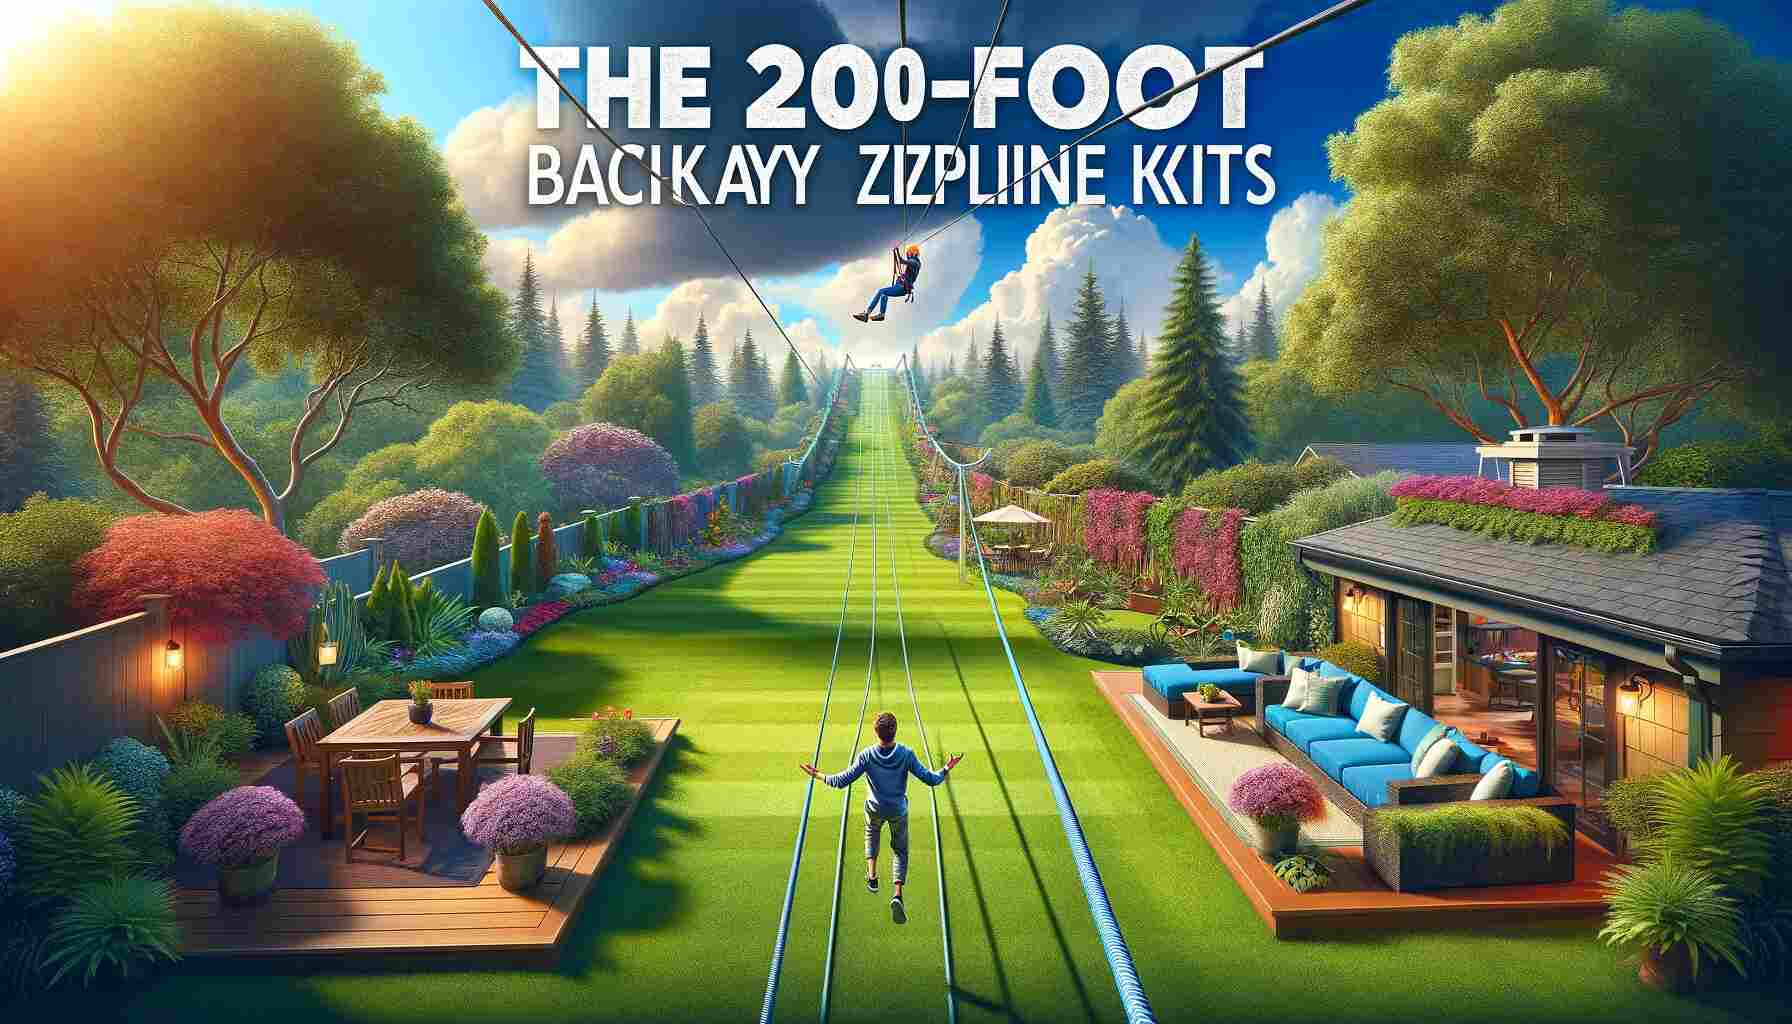 This Featured image is showing an expansive, well-groomed backyard with a 200-foot zipline extending from a tall tree to a lower area. A person is captured mid-ride on the zipline, adding a dynamic sense of fun and action. The lush green lawn is dotted with diverse flowering plants and a cozy seating area, under a vivid blue sky with fluffy clouds, creating an inviting outdoor setting. The title 'The Ultimate Guide to the Best 200-Foot Backyard Zipline Kits' is prominently displayed in large, legible font at the top, enhancing the image's appeal as a guide header.